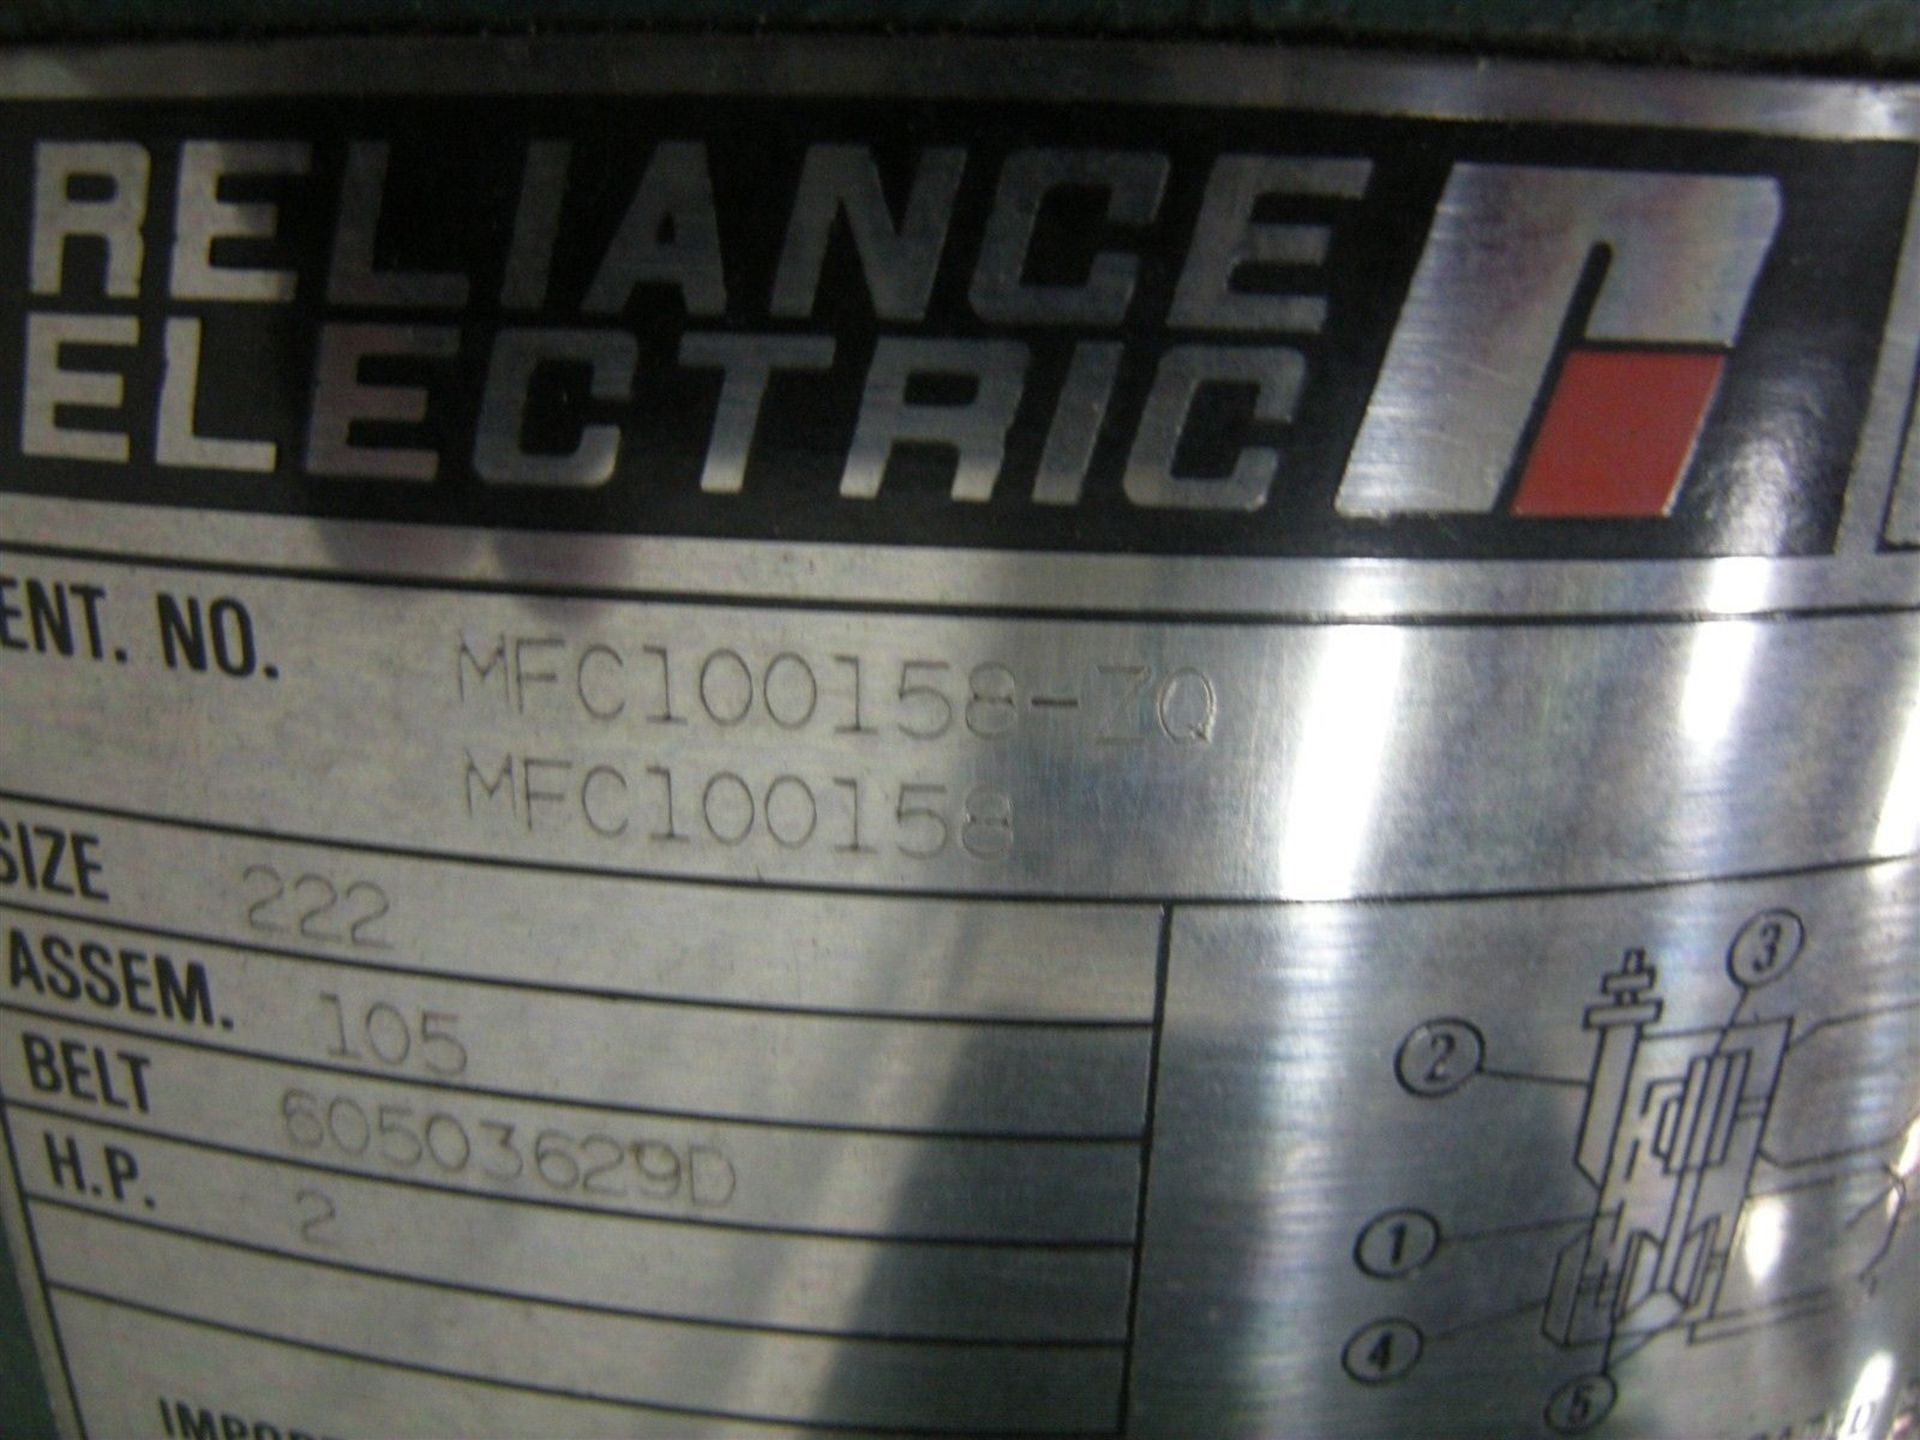 Reeves Vari speed Reducer MFC100158 2HP, Size 222 Gear Ratio 20.9 (Rigging Fee - $95) - Image 3 of 8